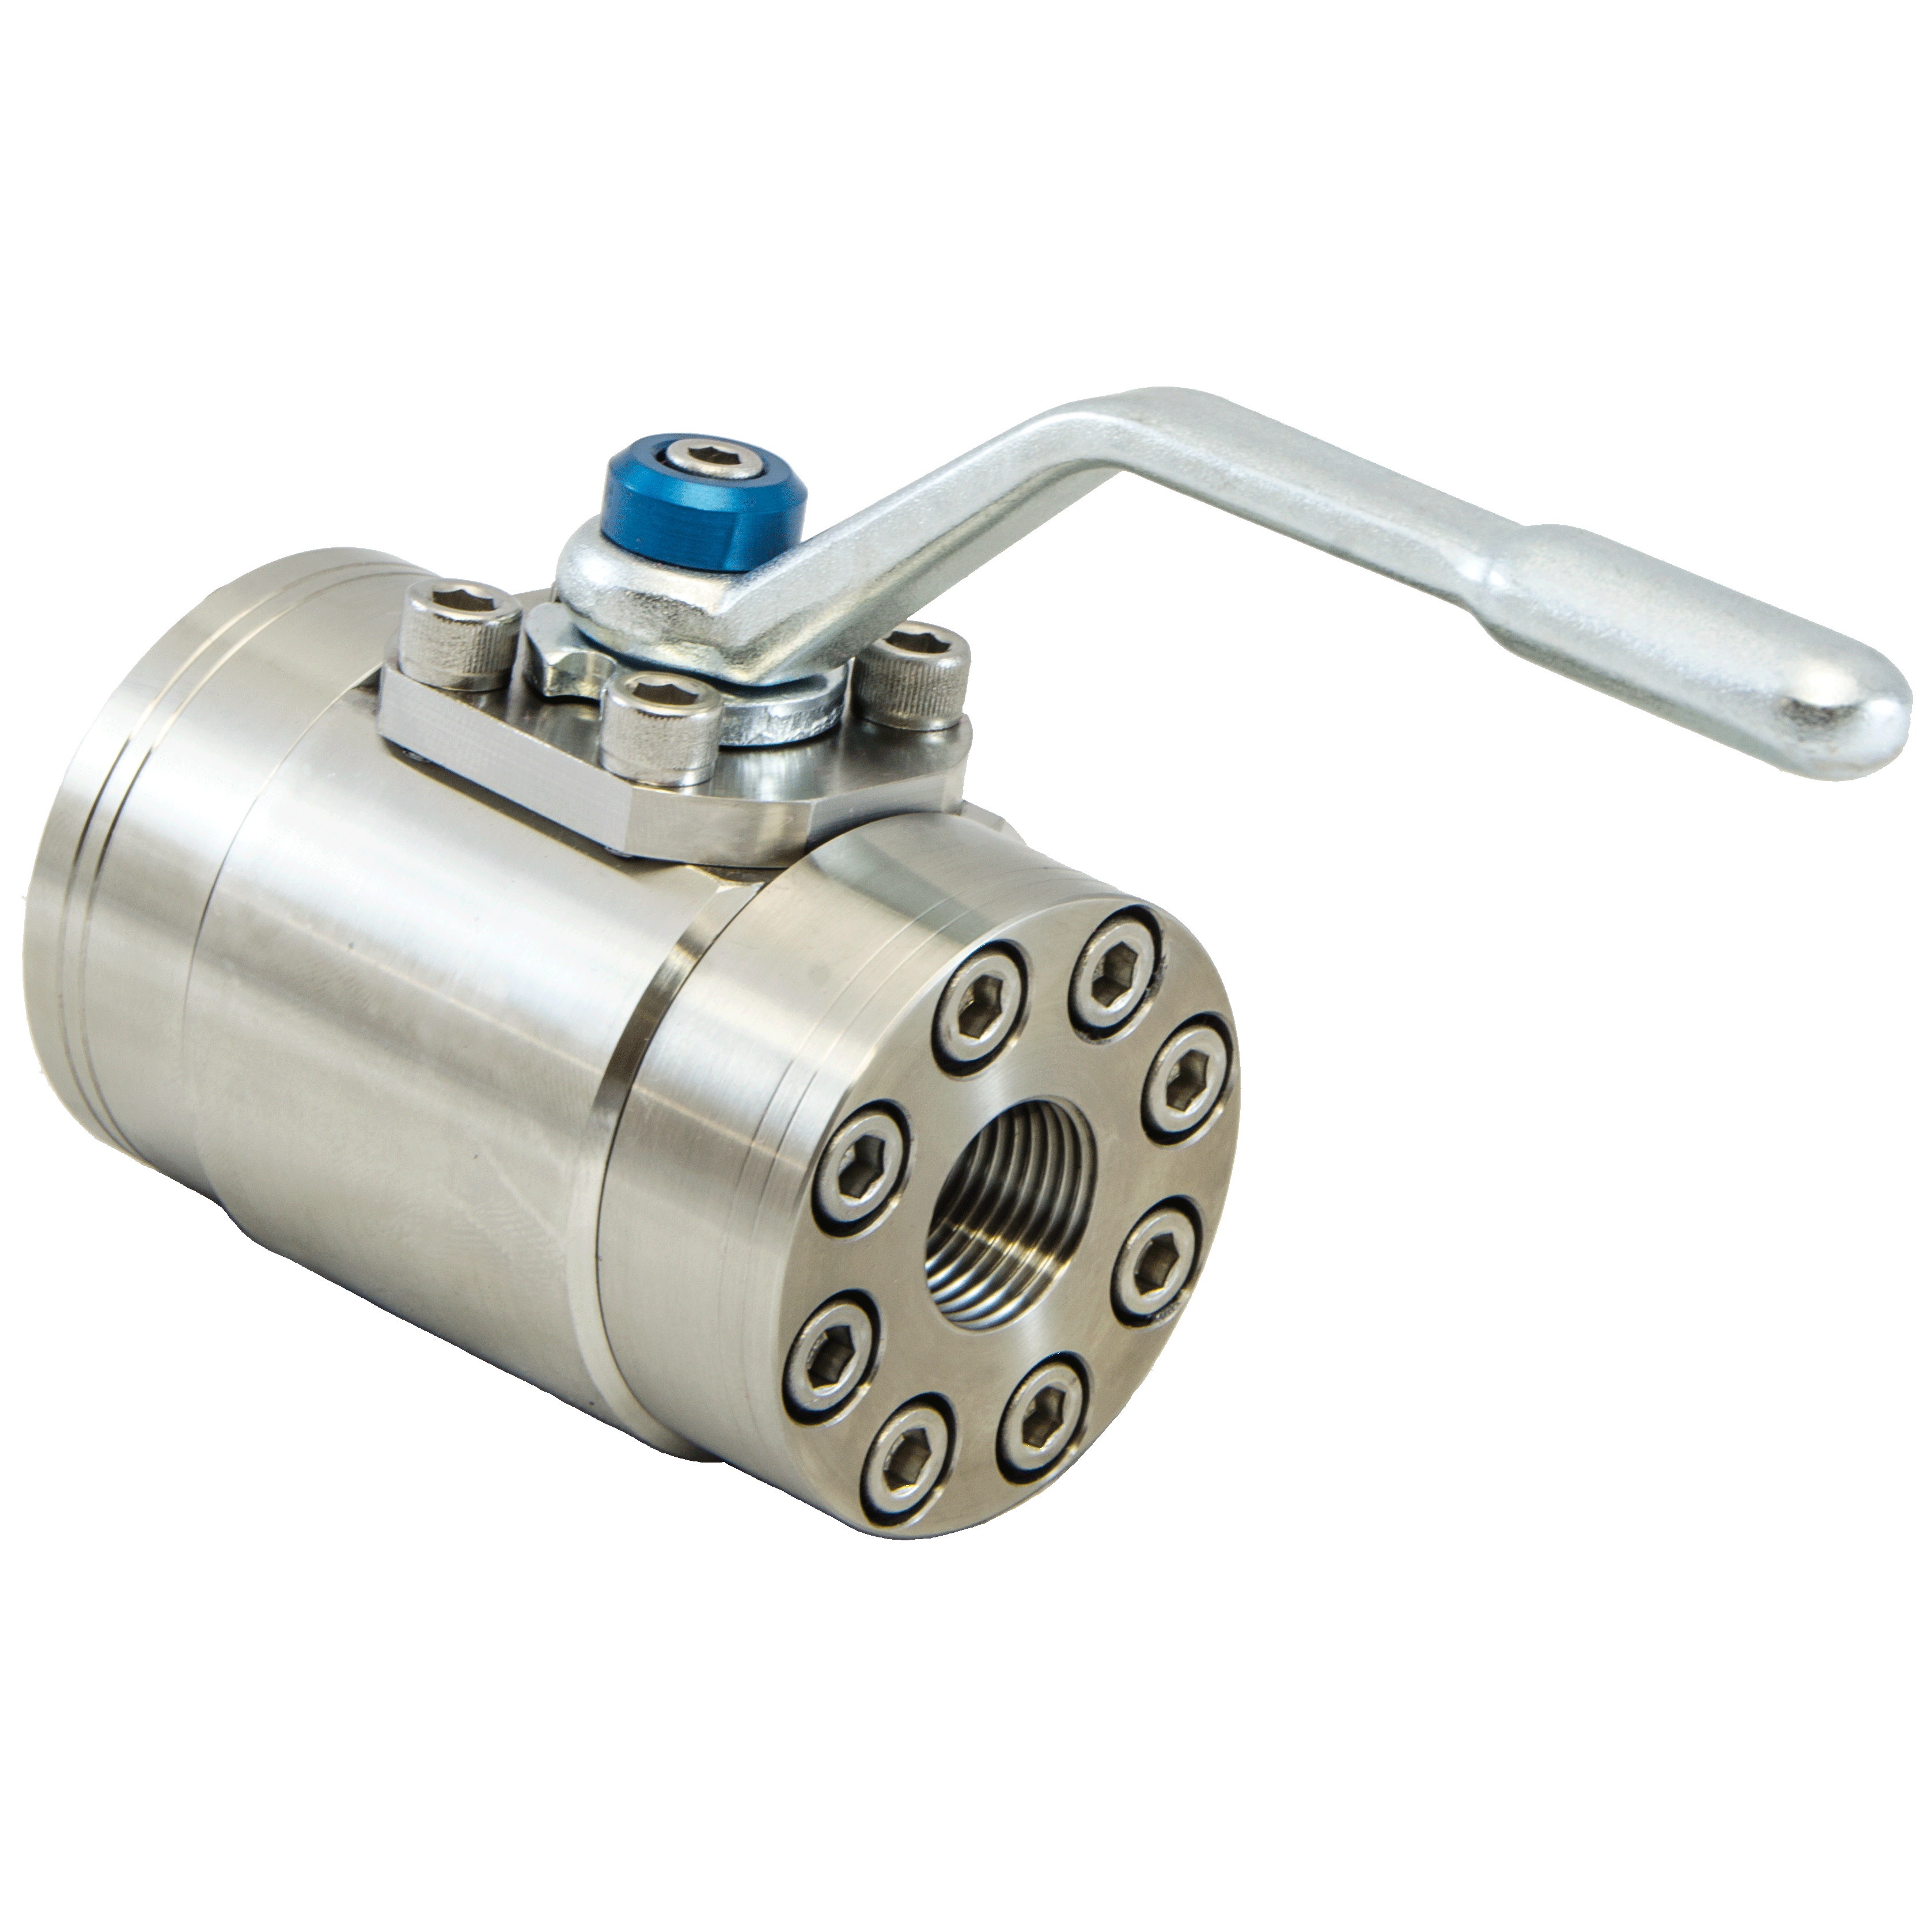 BVQG-1250S-2211 : DMIC Stainless Gas Ball Valve, #20 SAE (1.25), 316 Stainless Steel, 6000psi, Two-Way